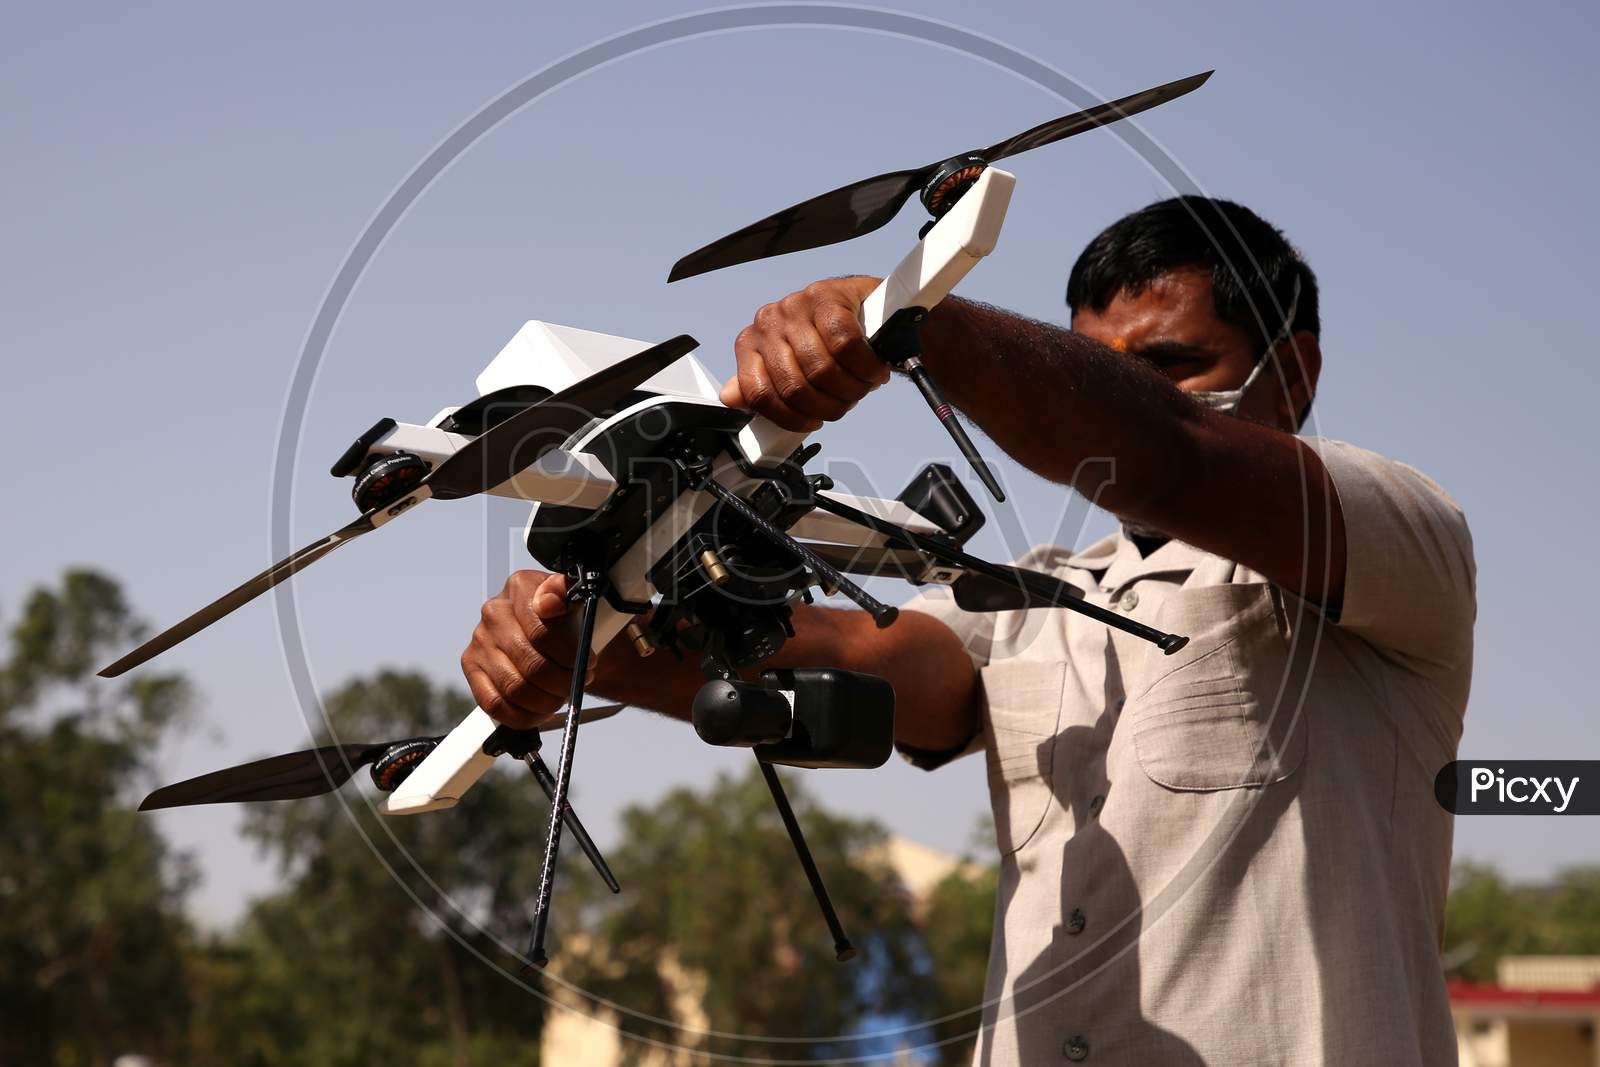 A Police Personnel Prepares To Check A Drone For Surveilling A Hotspot Area During A Government-Imposed Nationwide Lockdown As A Preventive Measure Against The Covid-19 Coronavirus, In Ajmer, Rajasthan, India On 02 May 2020.